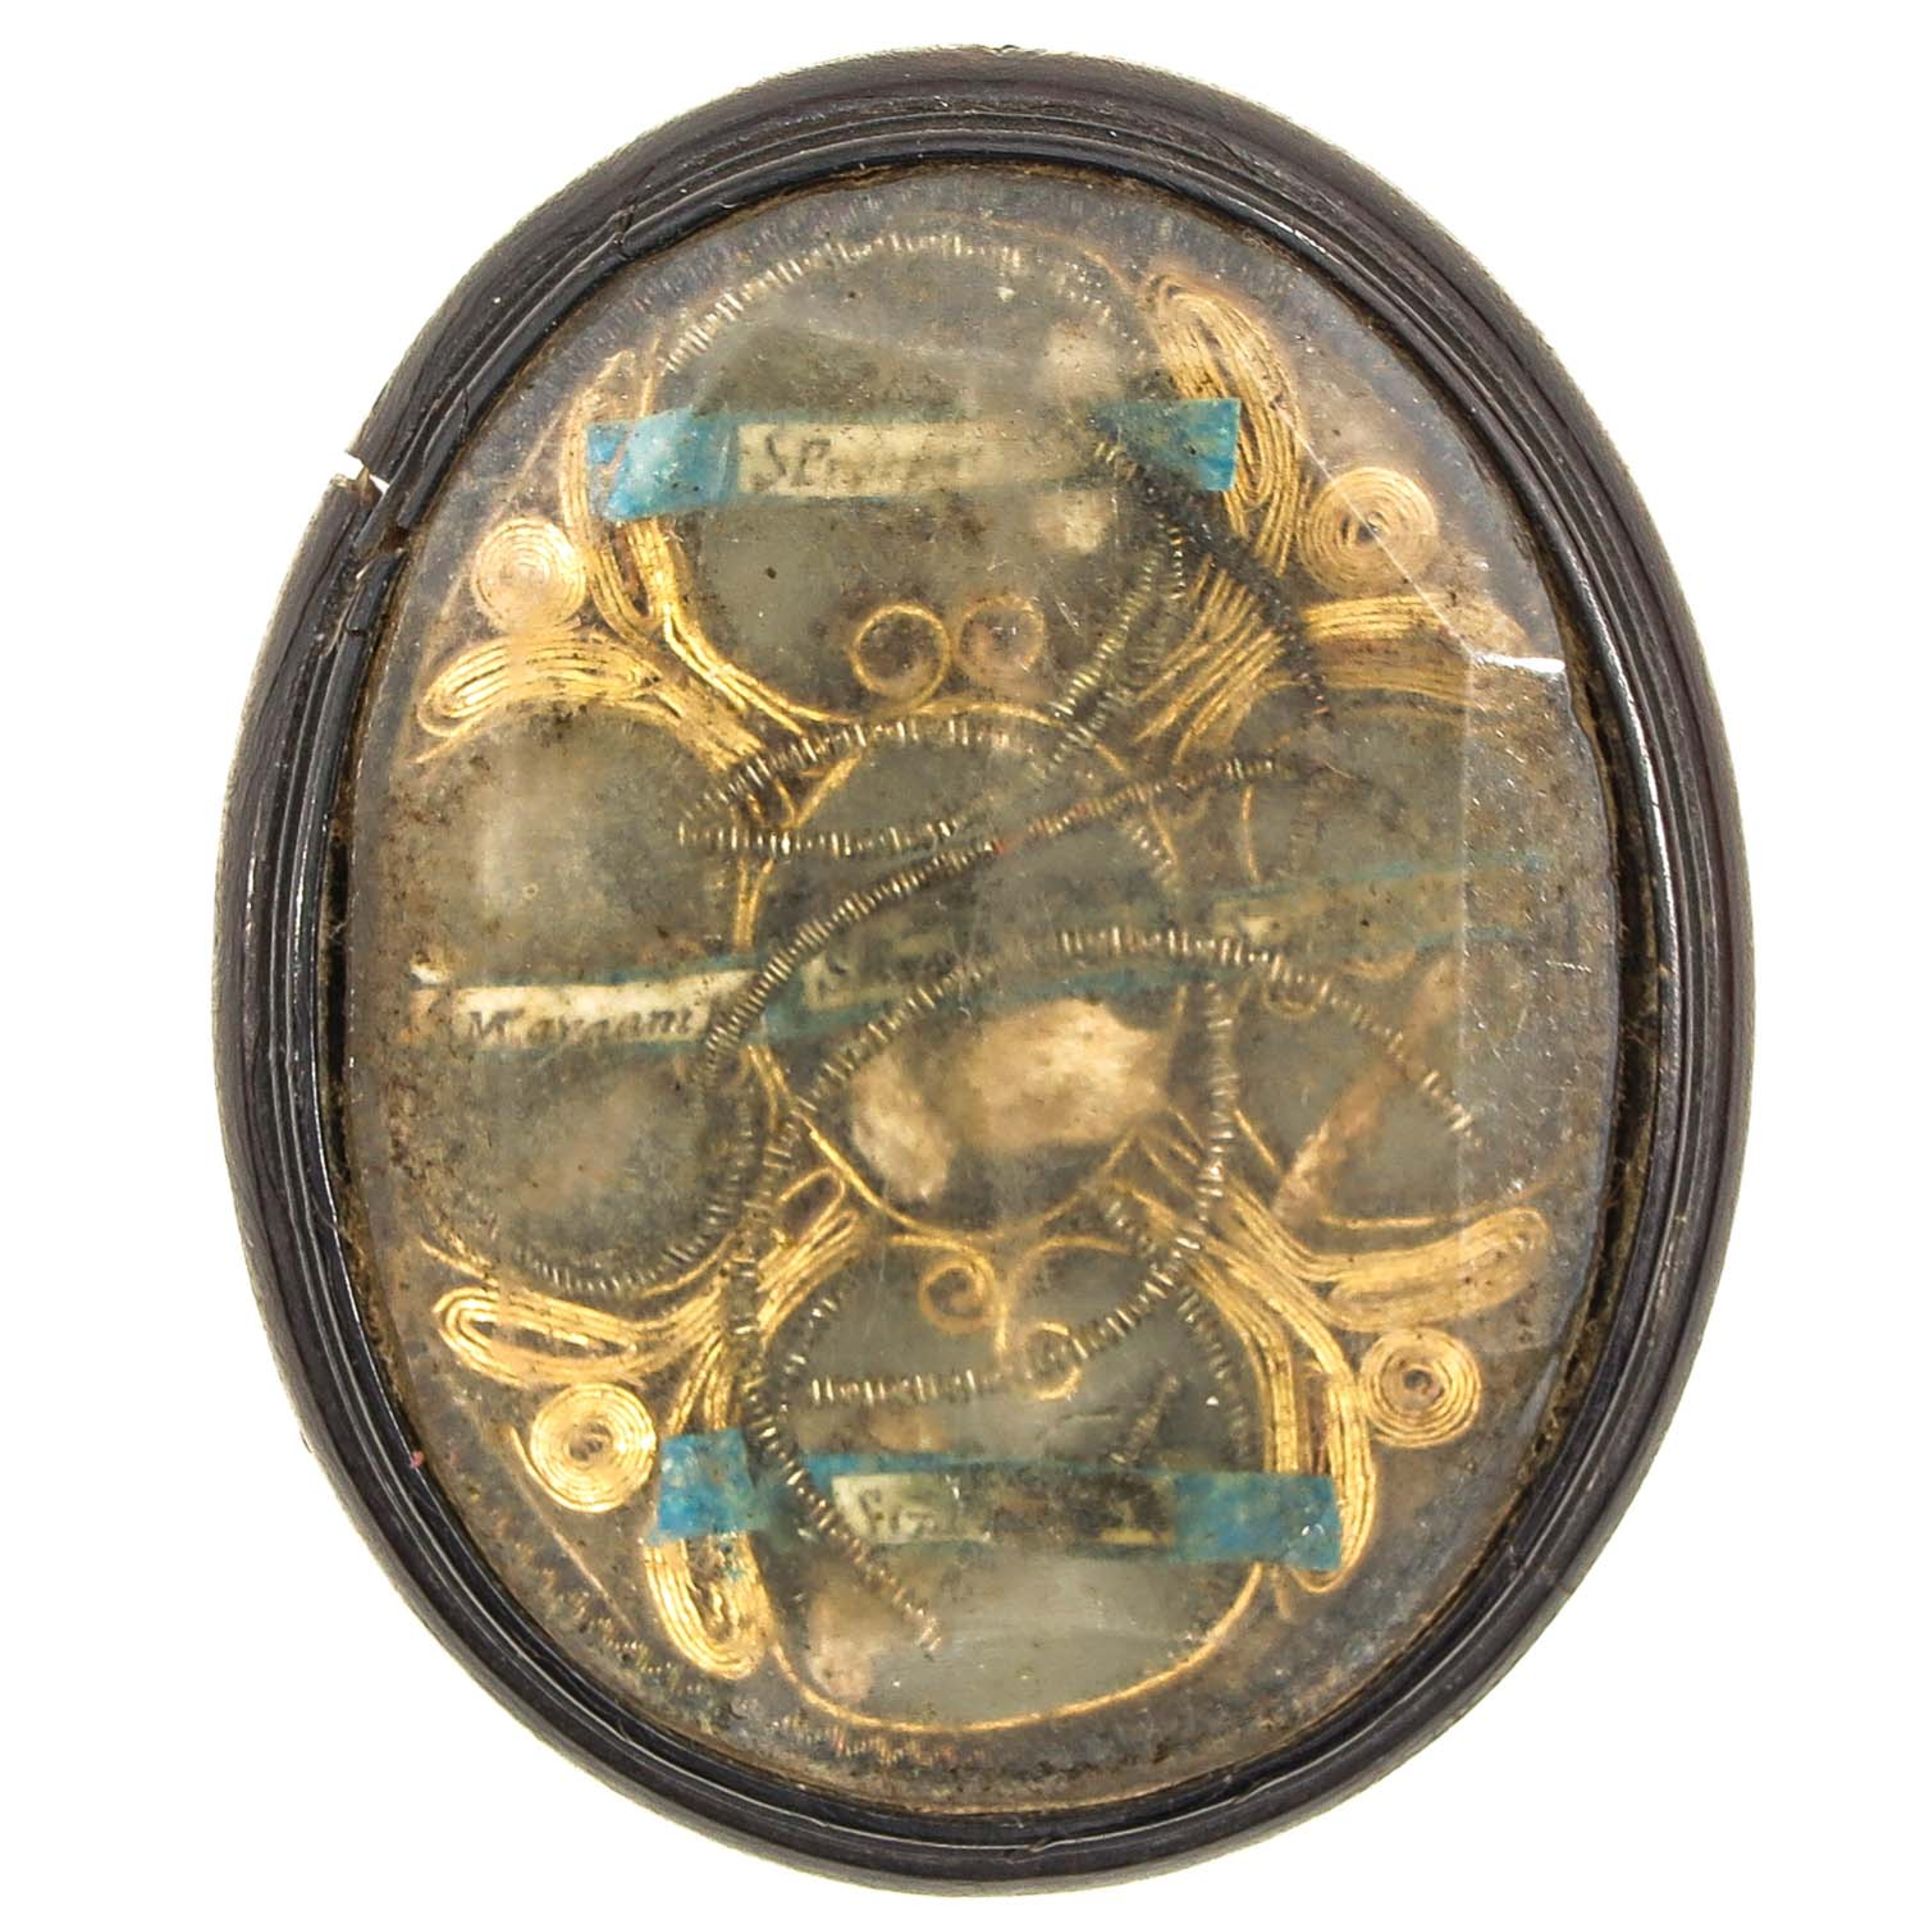 A Relic Holder with 10 Relics - Image 2 of 2